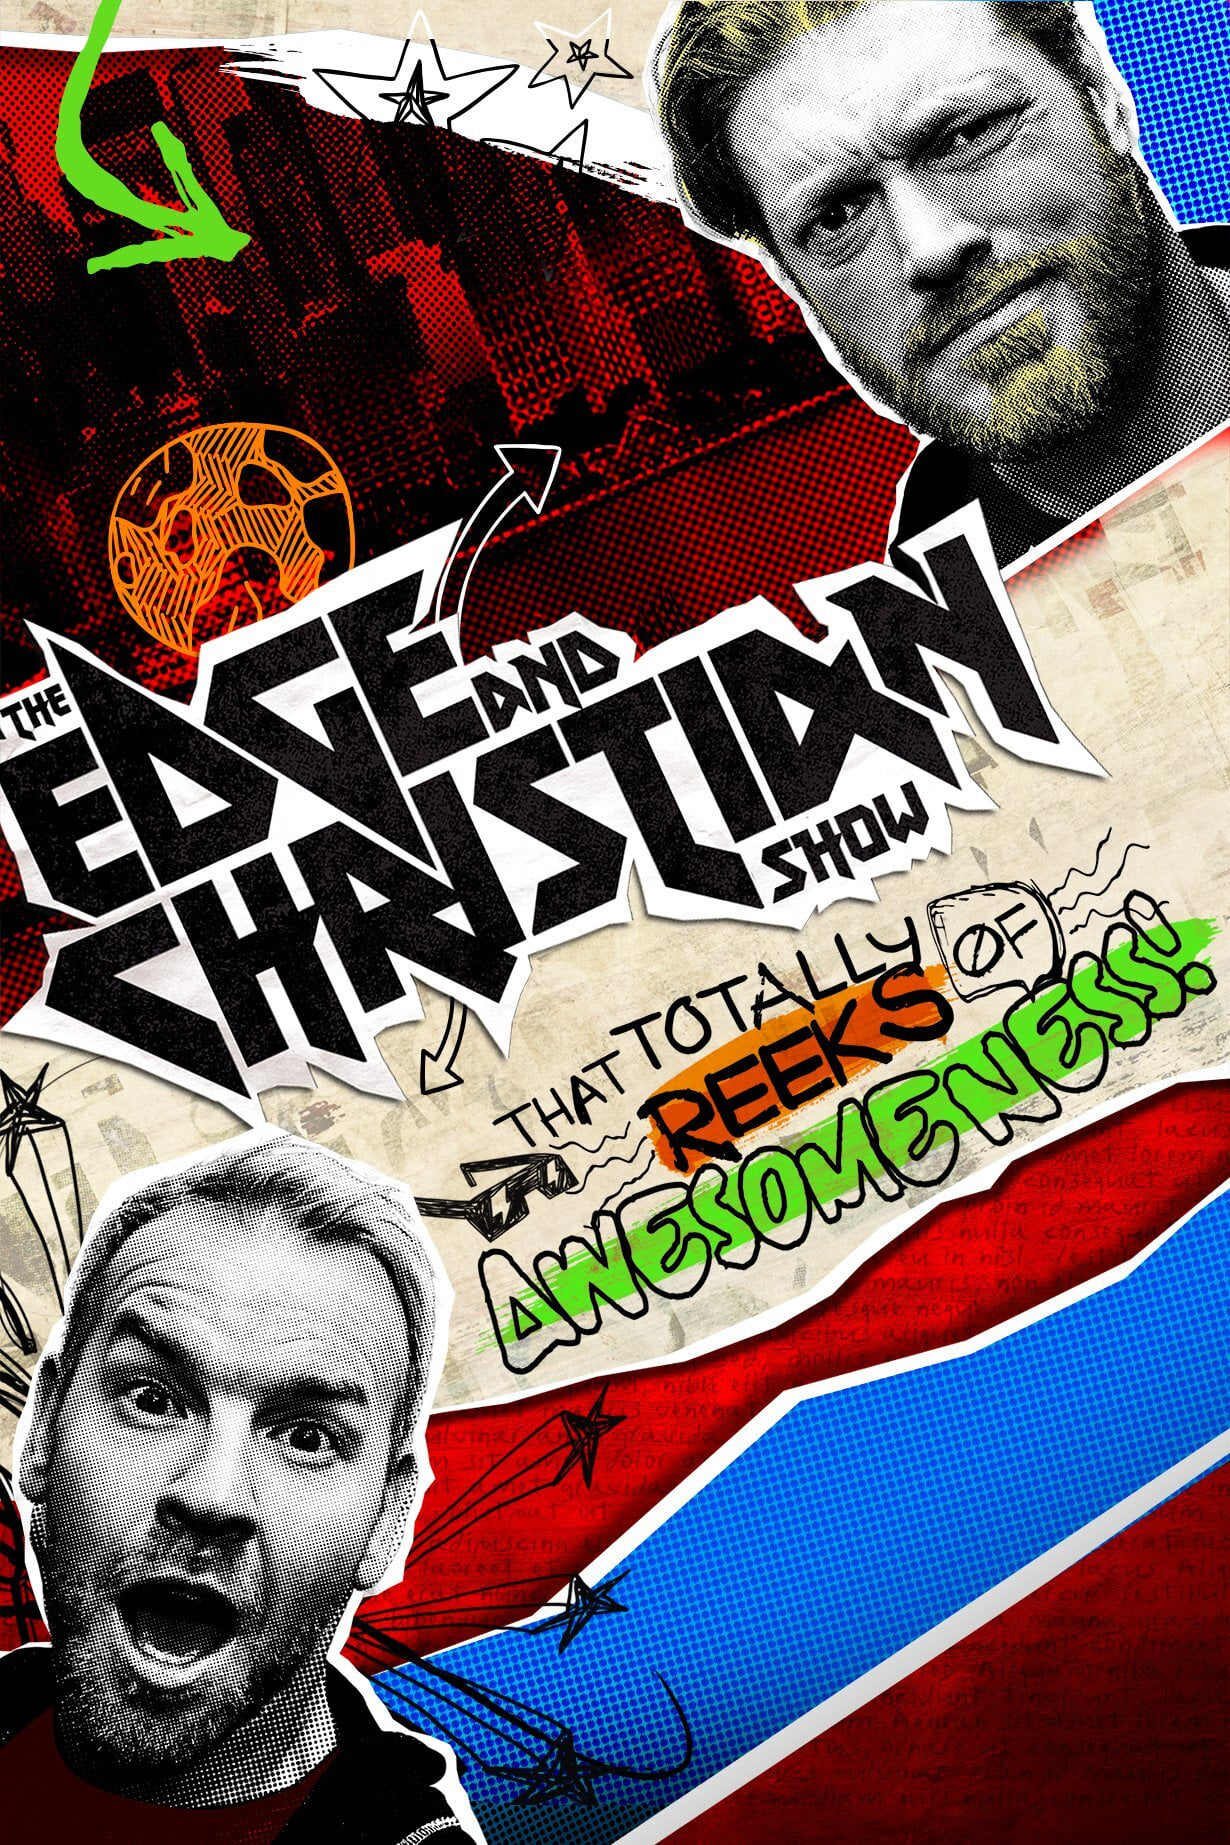 The Edge and Christian Show That Totally Reeks of Awesomeness